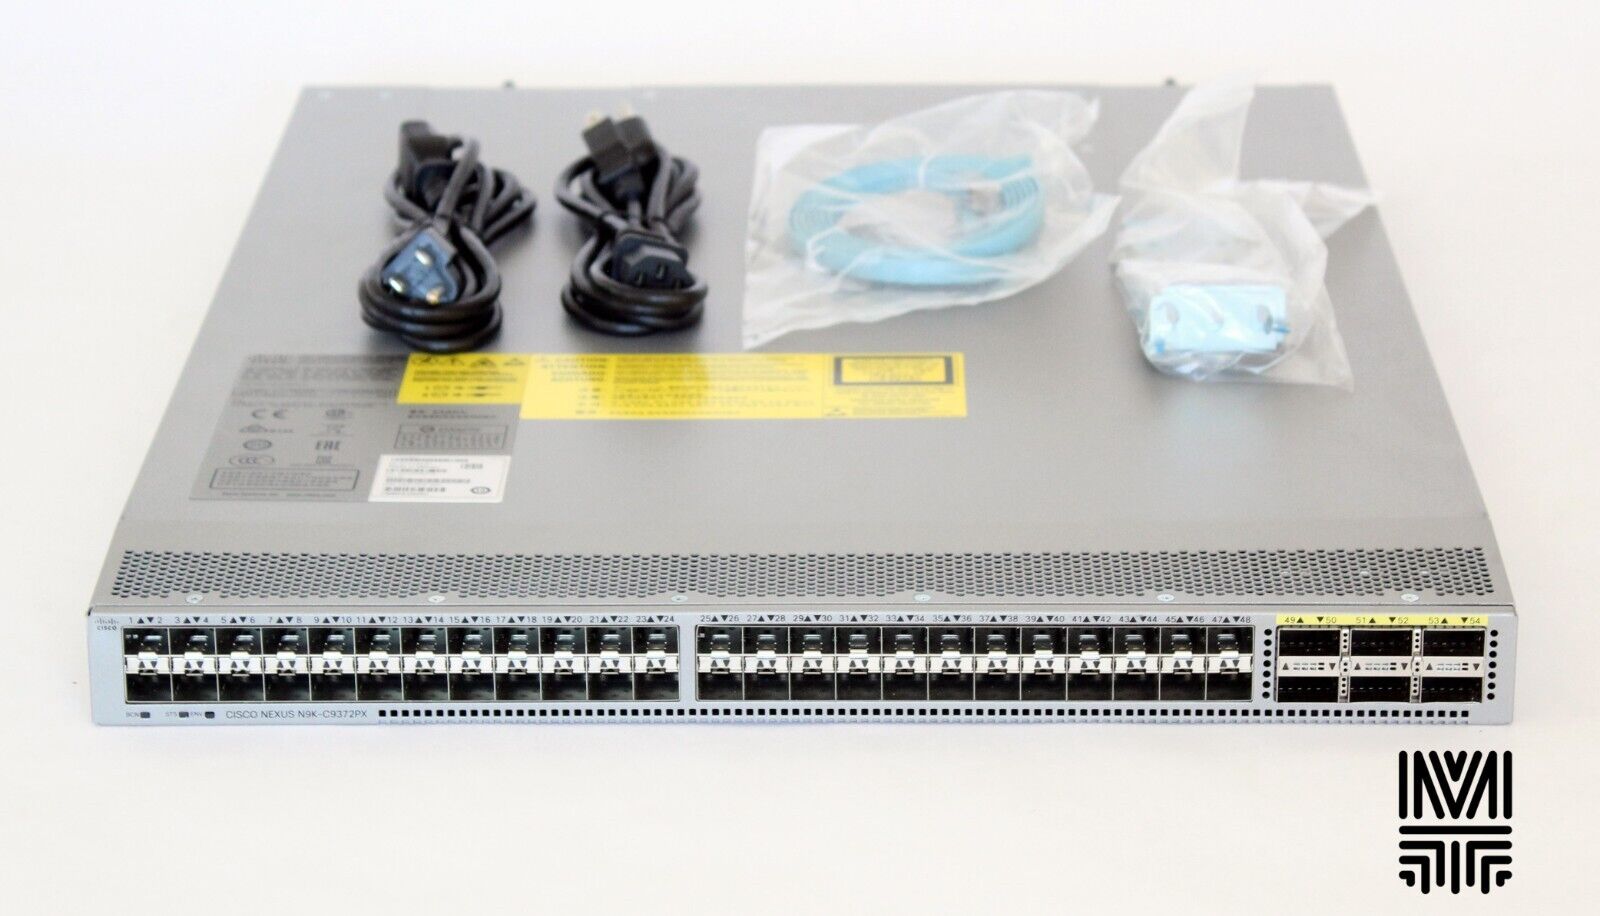 Cisco N9K-C9372PX 48p 10G SFP+ and 6p 40G QSFP+ Quad Enhanced Small Form-Factor